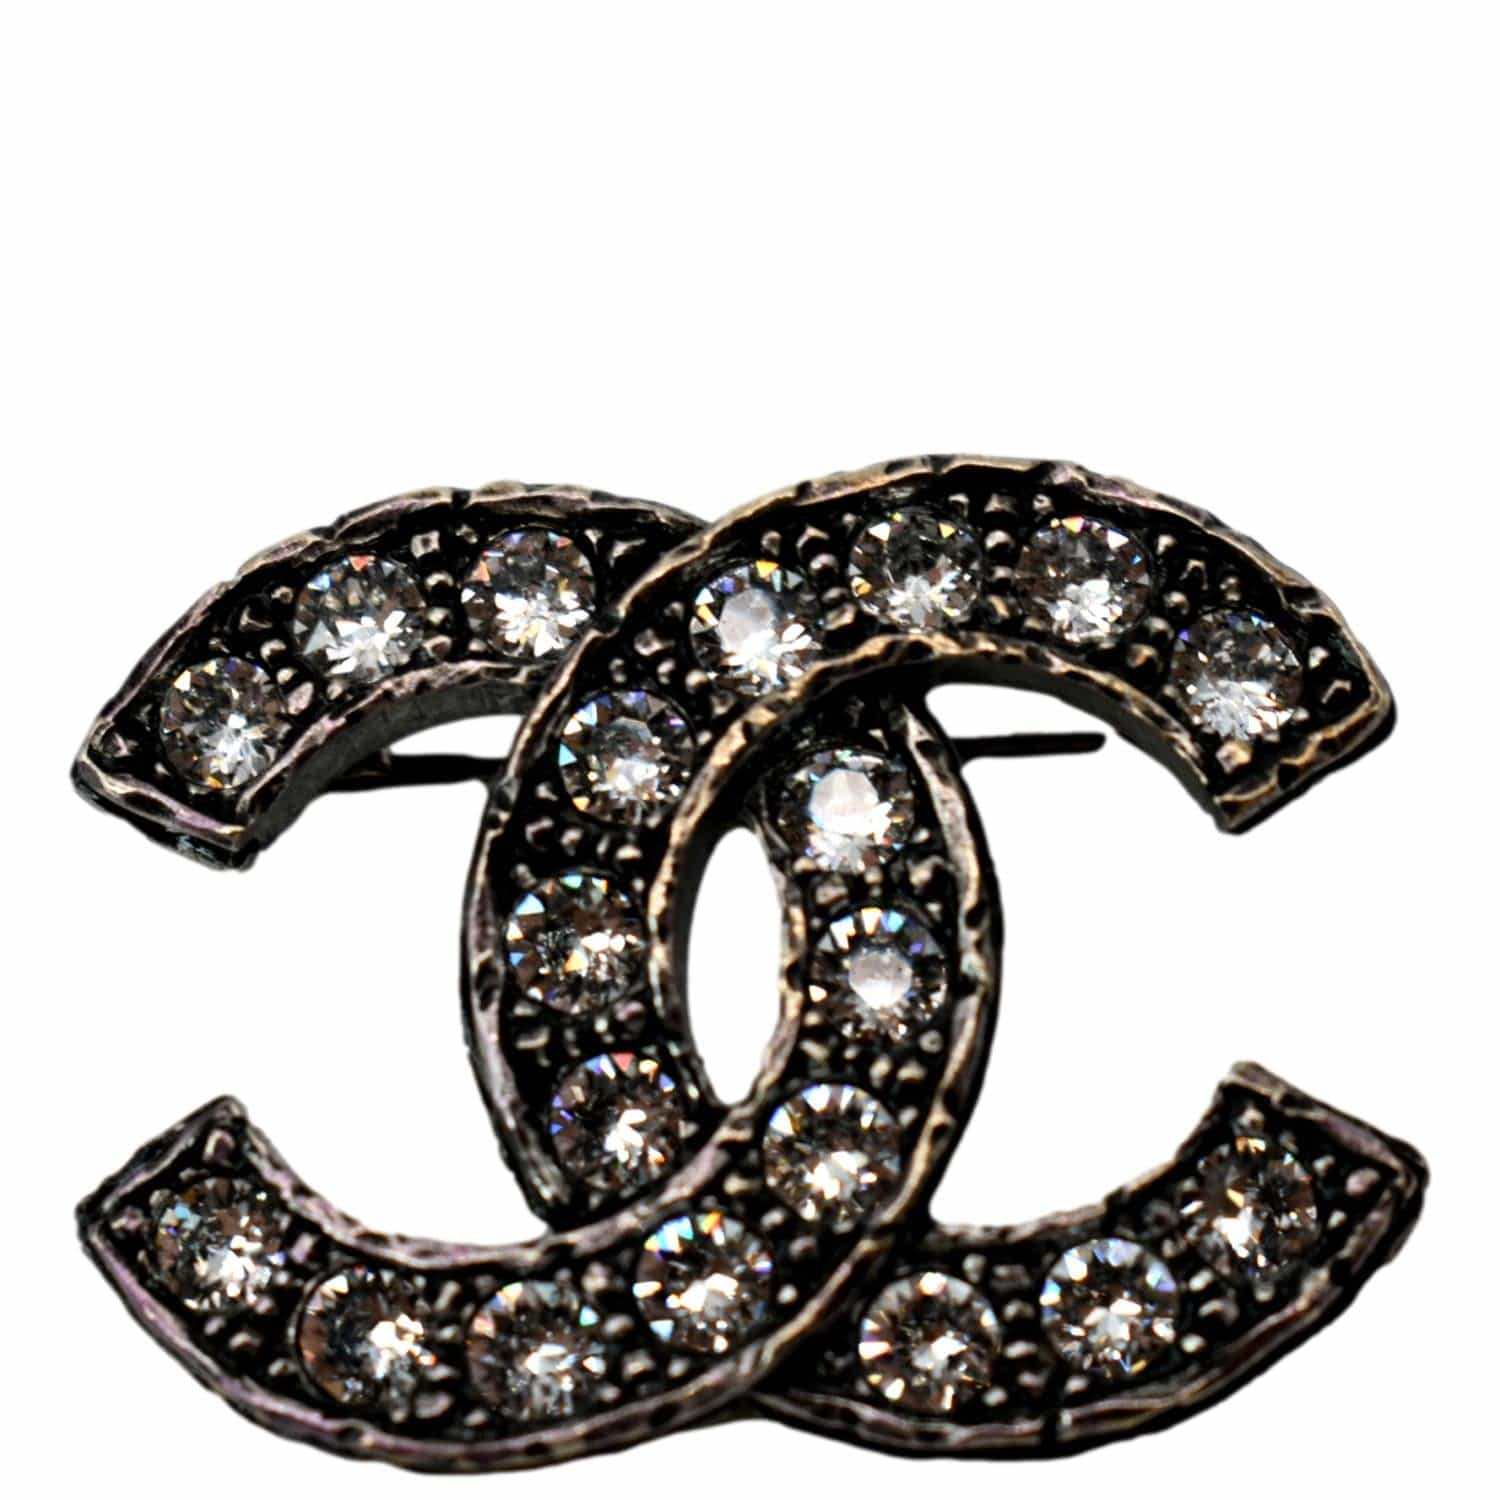 Chanel Baguette Crystal CC Brooch in Box  Chanel jewelry, Chanel brooch,  Crystal stone jewelry